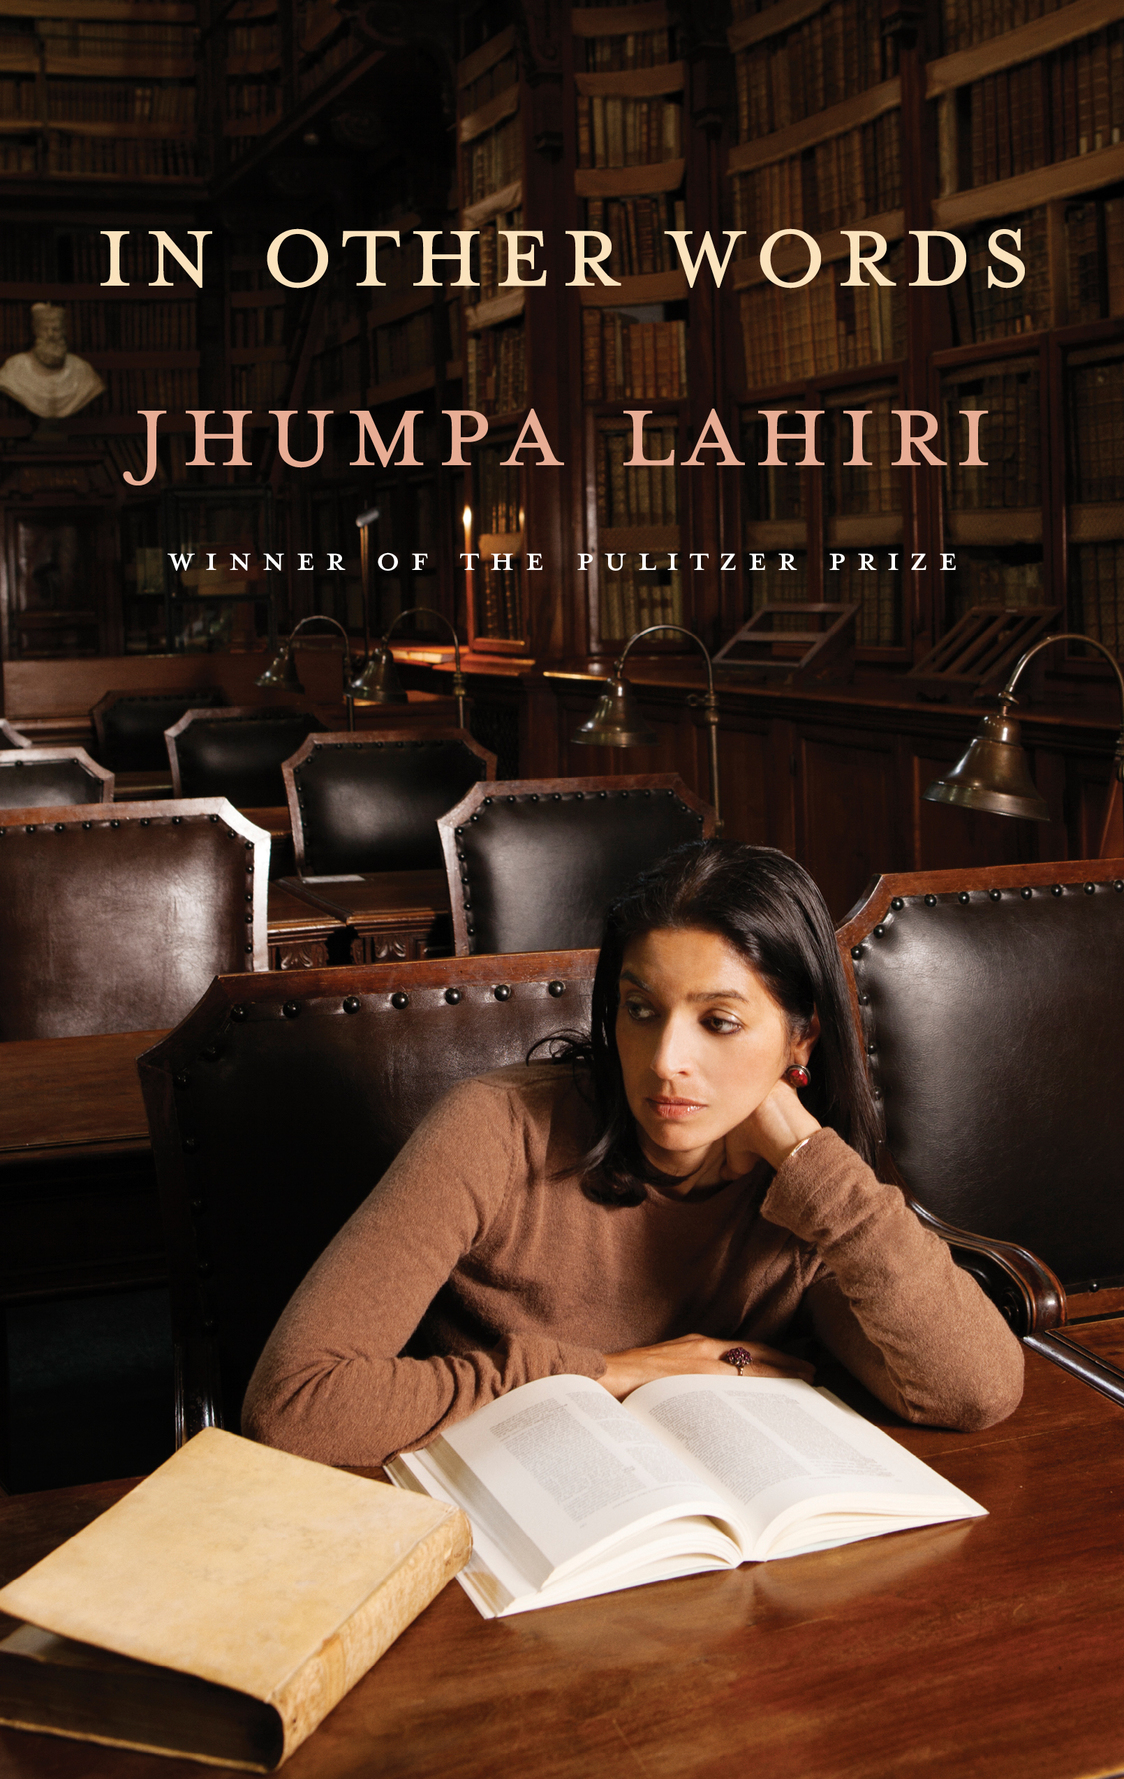 In Other Words (2016) by Jhumpa Lahiri